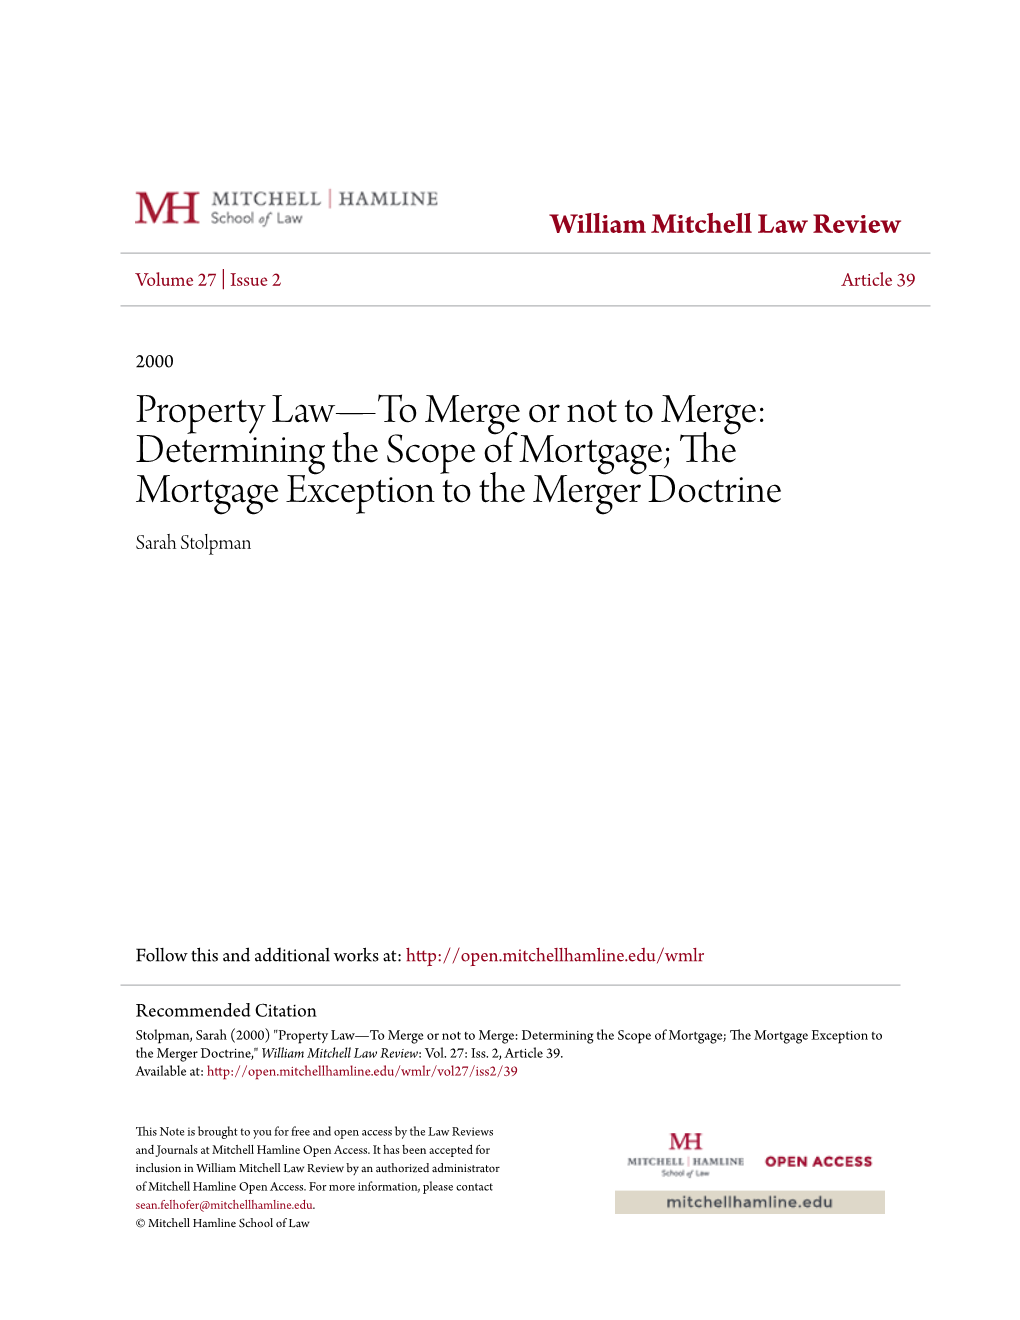 Property Law—To Merge Or Not to Merge: Determining the Scope of Mortgage; the Mortgage Exception to the Merger Doctrine Sarah Stolpman